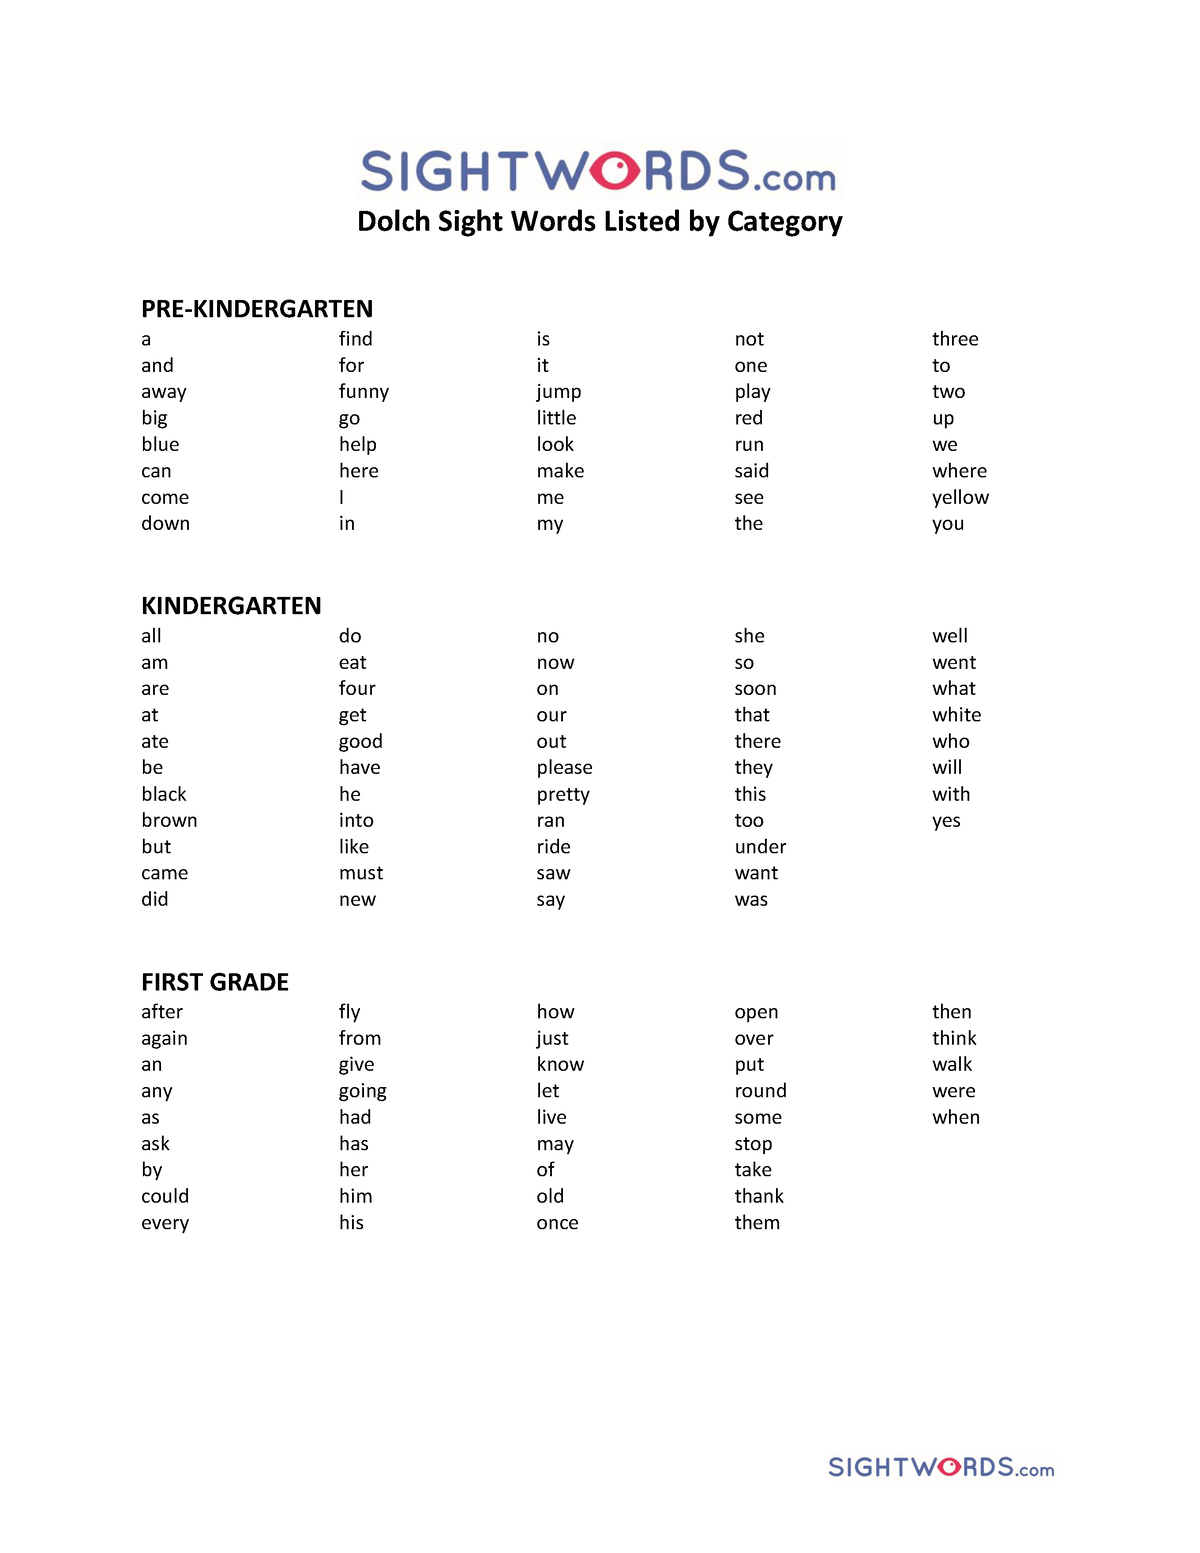 dolch-group-of-words-for-primary-school-dolch-sight-words-listed-by-category-pre-kindergarten